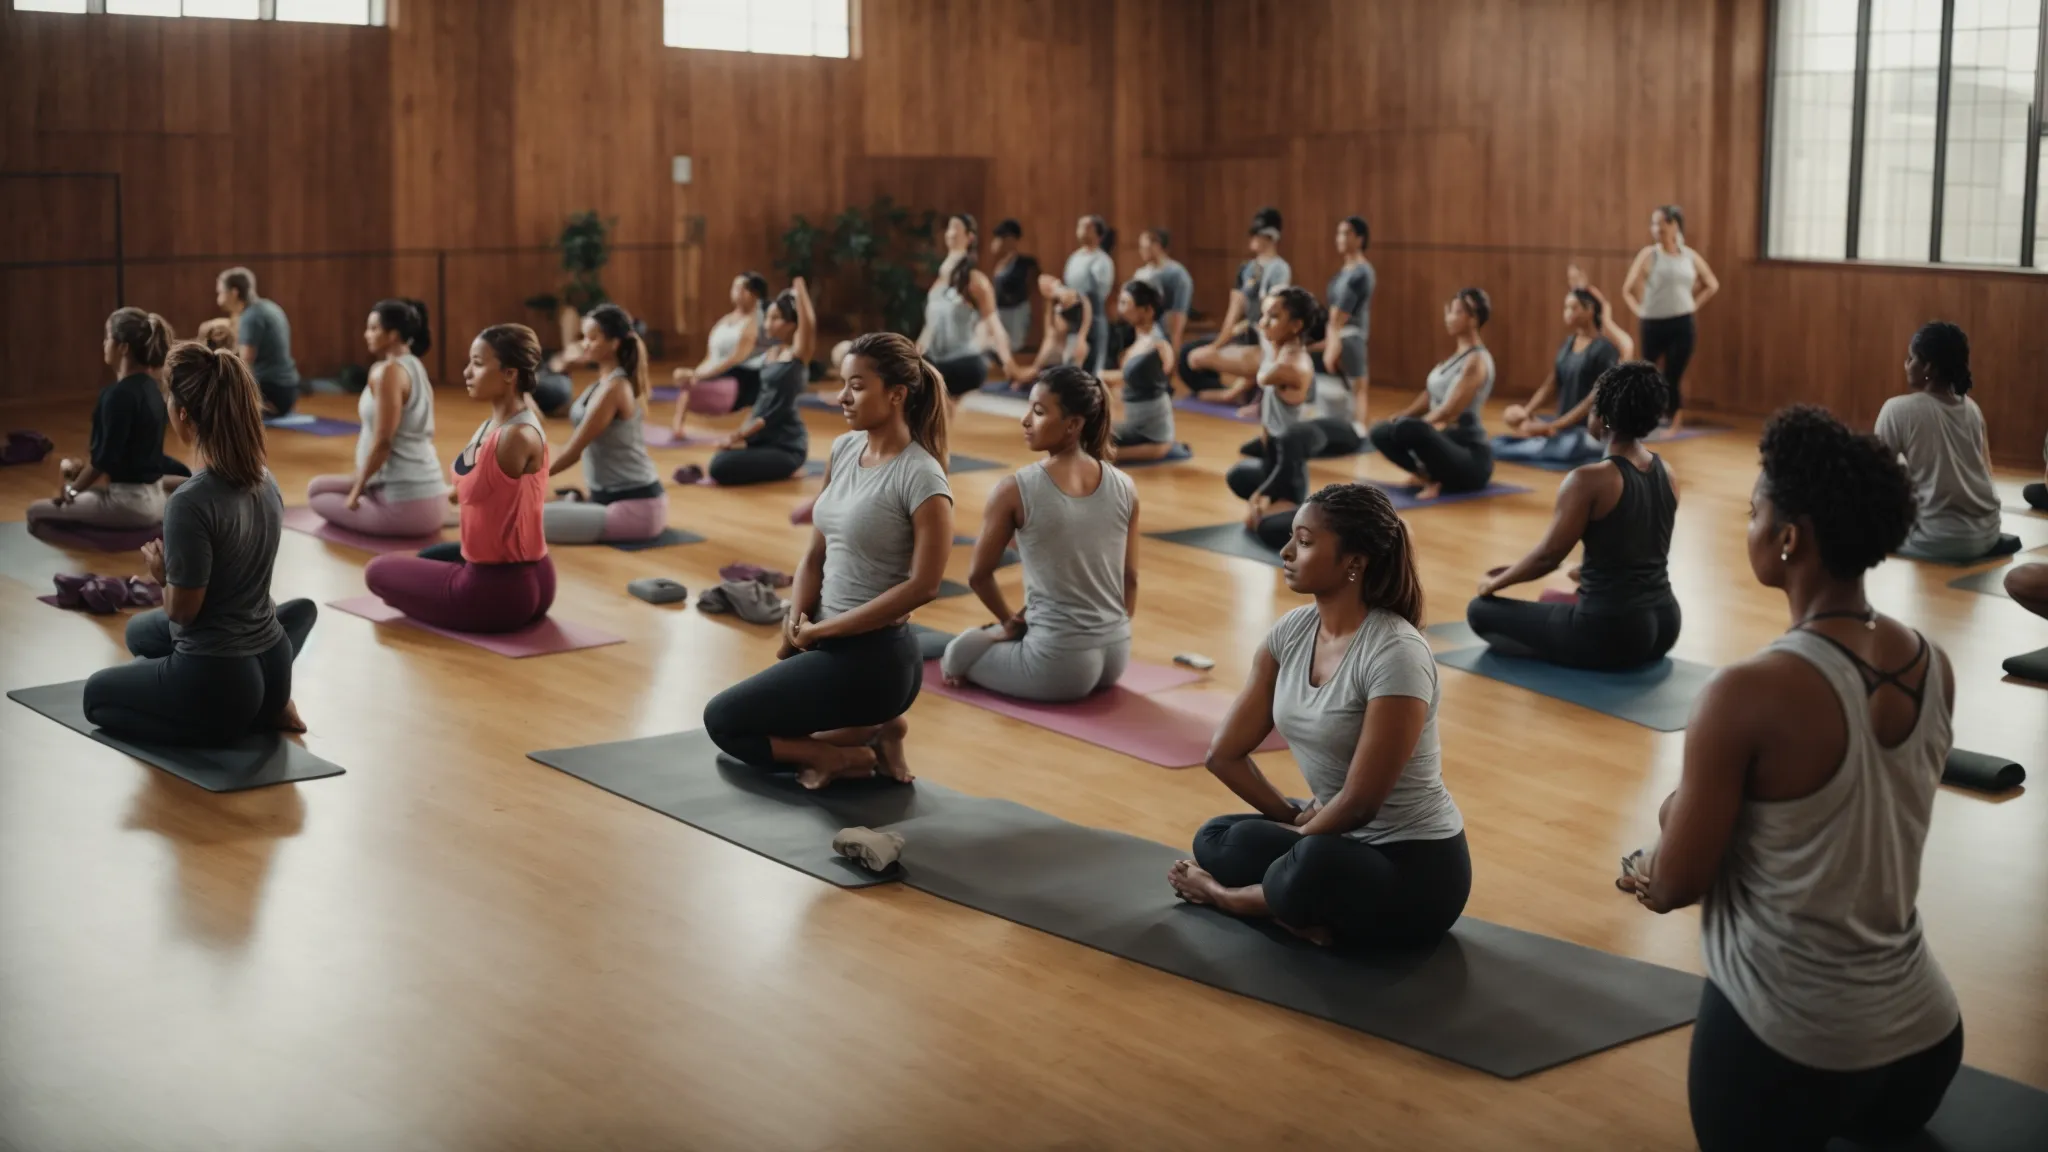 a diverse group of people collectively engaging in a yoga class in a bright, spacious gym.